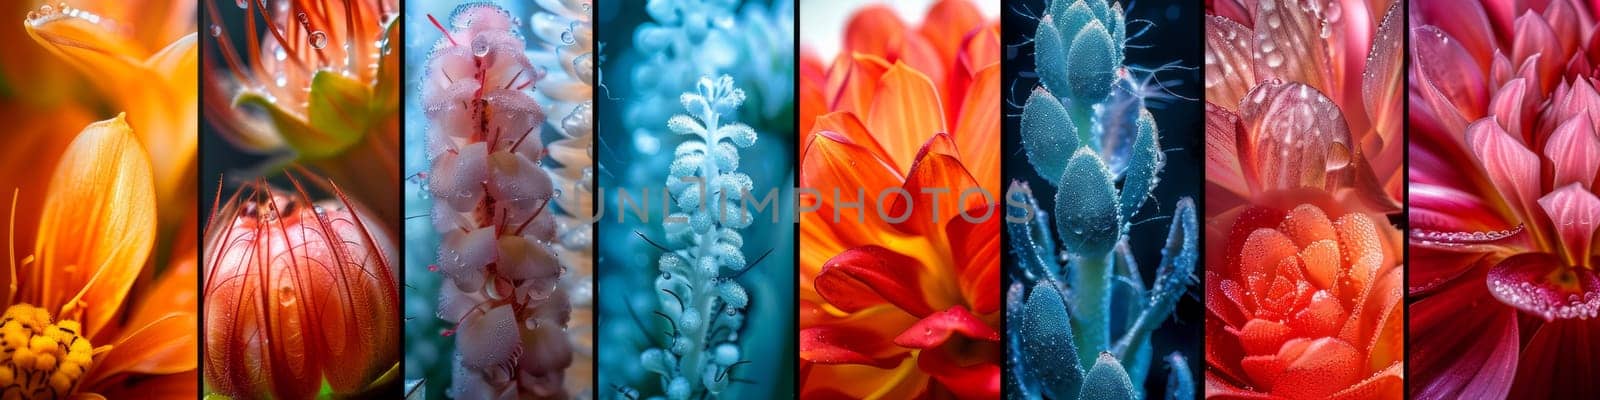 A series of close up images of different colored flowers